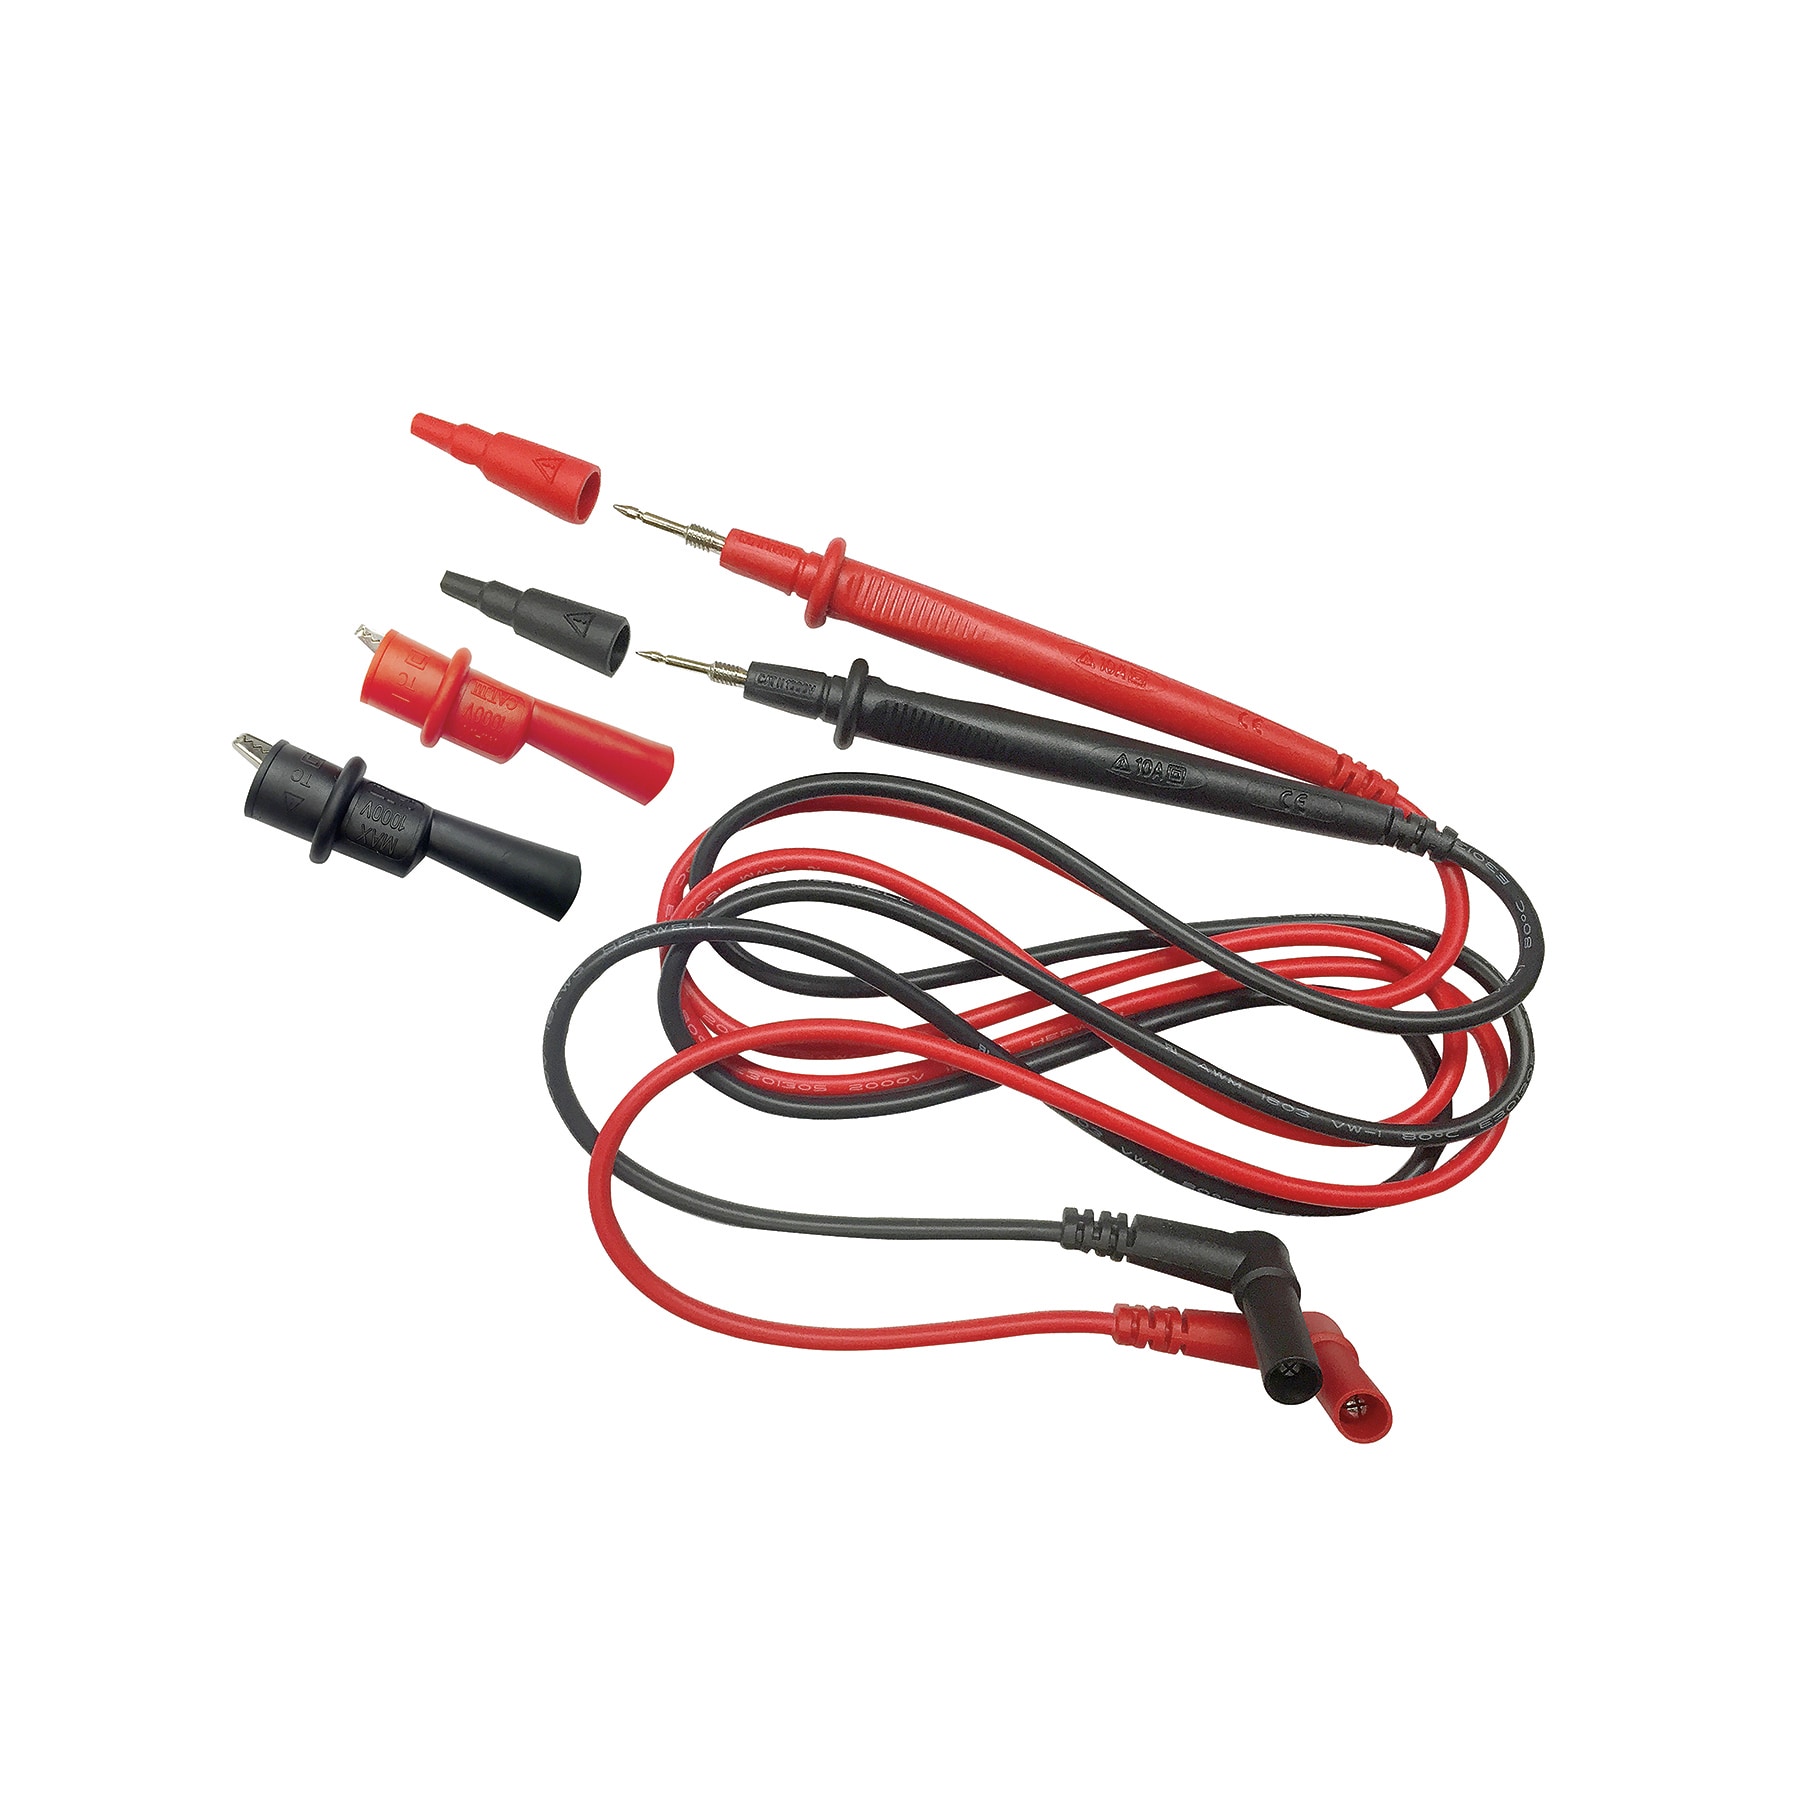 Test Lead Accessories  Electronic Specialties